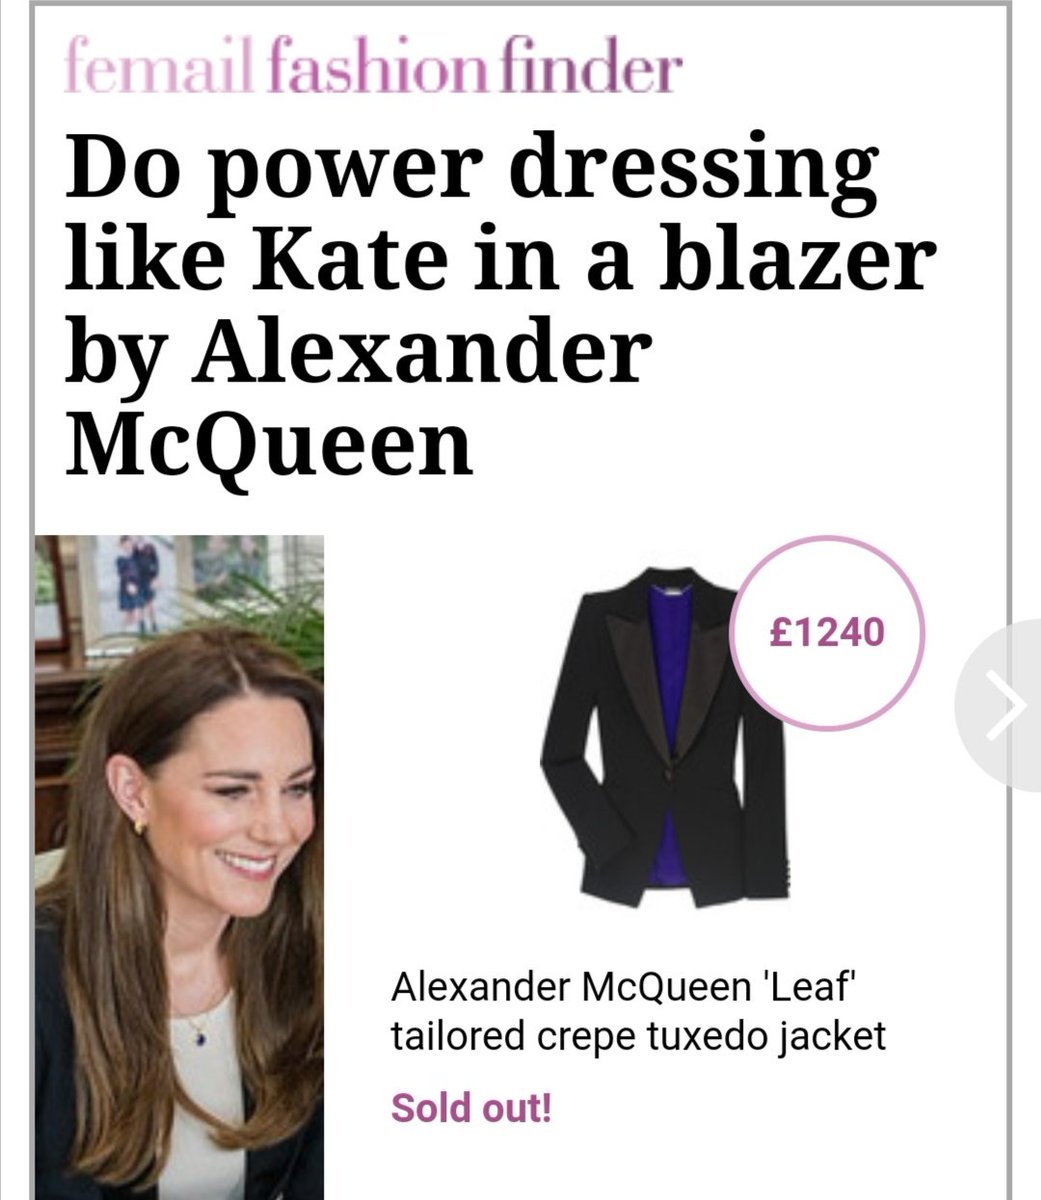 Exhibit 40:  #ExpensiveClothingGateIf in the public eye as much as Meghan and Kate, one has to dress well. That doesn't come cheap. McQueen and De La Renta are both top designers, neither are cheap. Why is £94k worth of clothing OK for one, but the other "has expensive taste"?